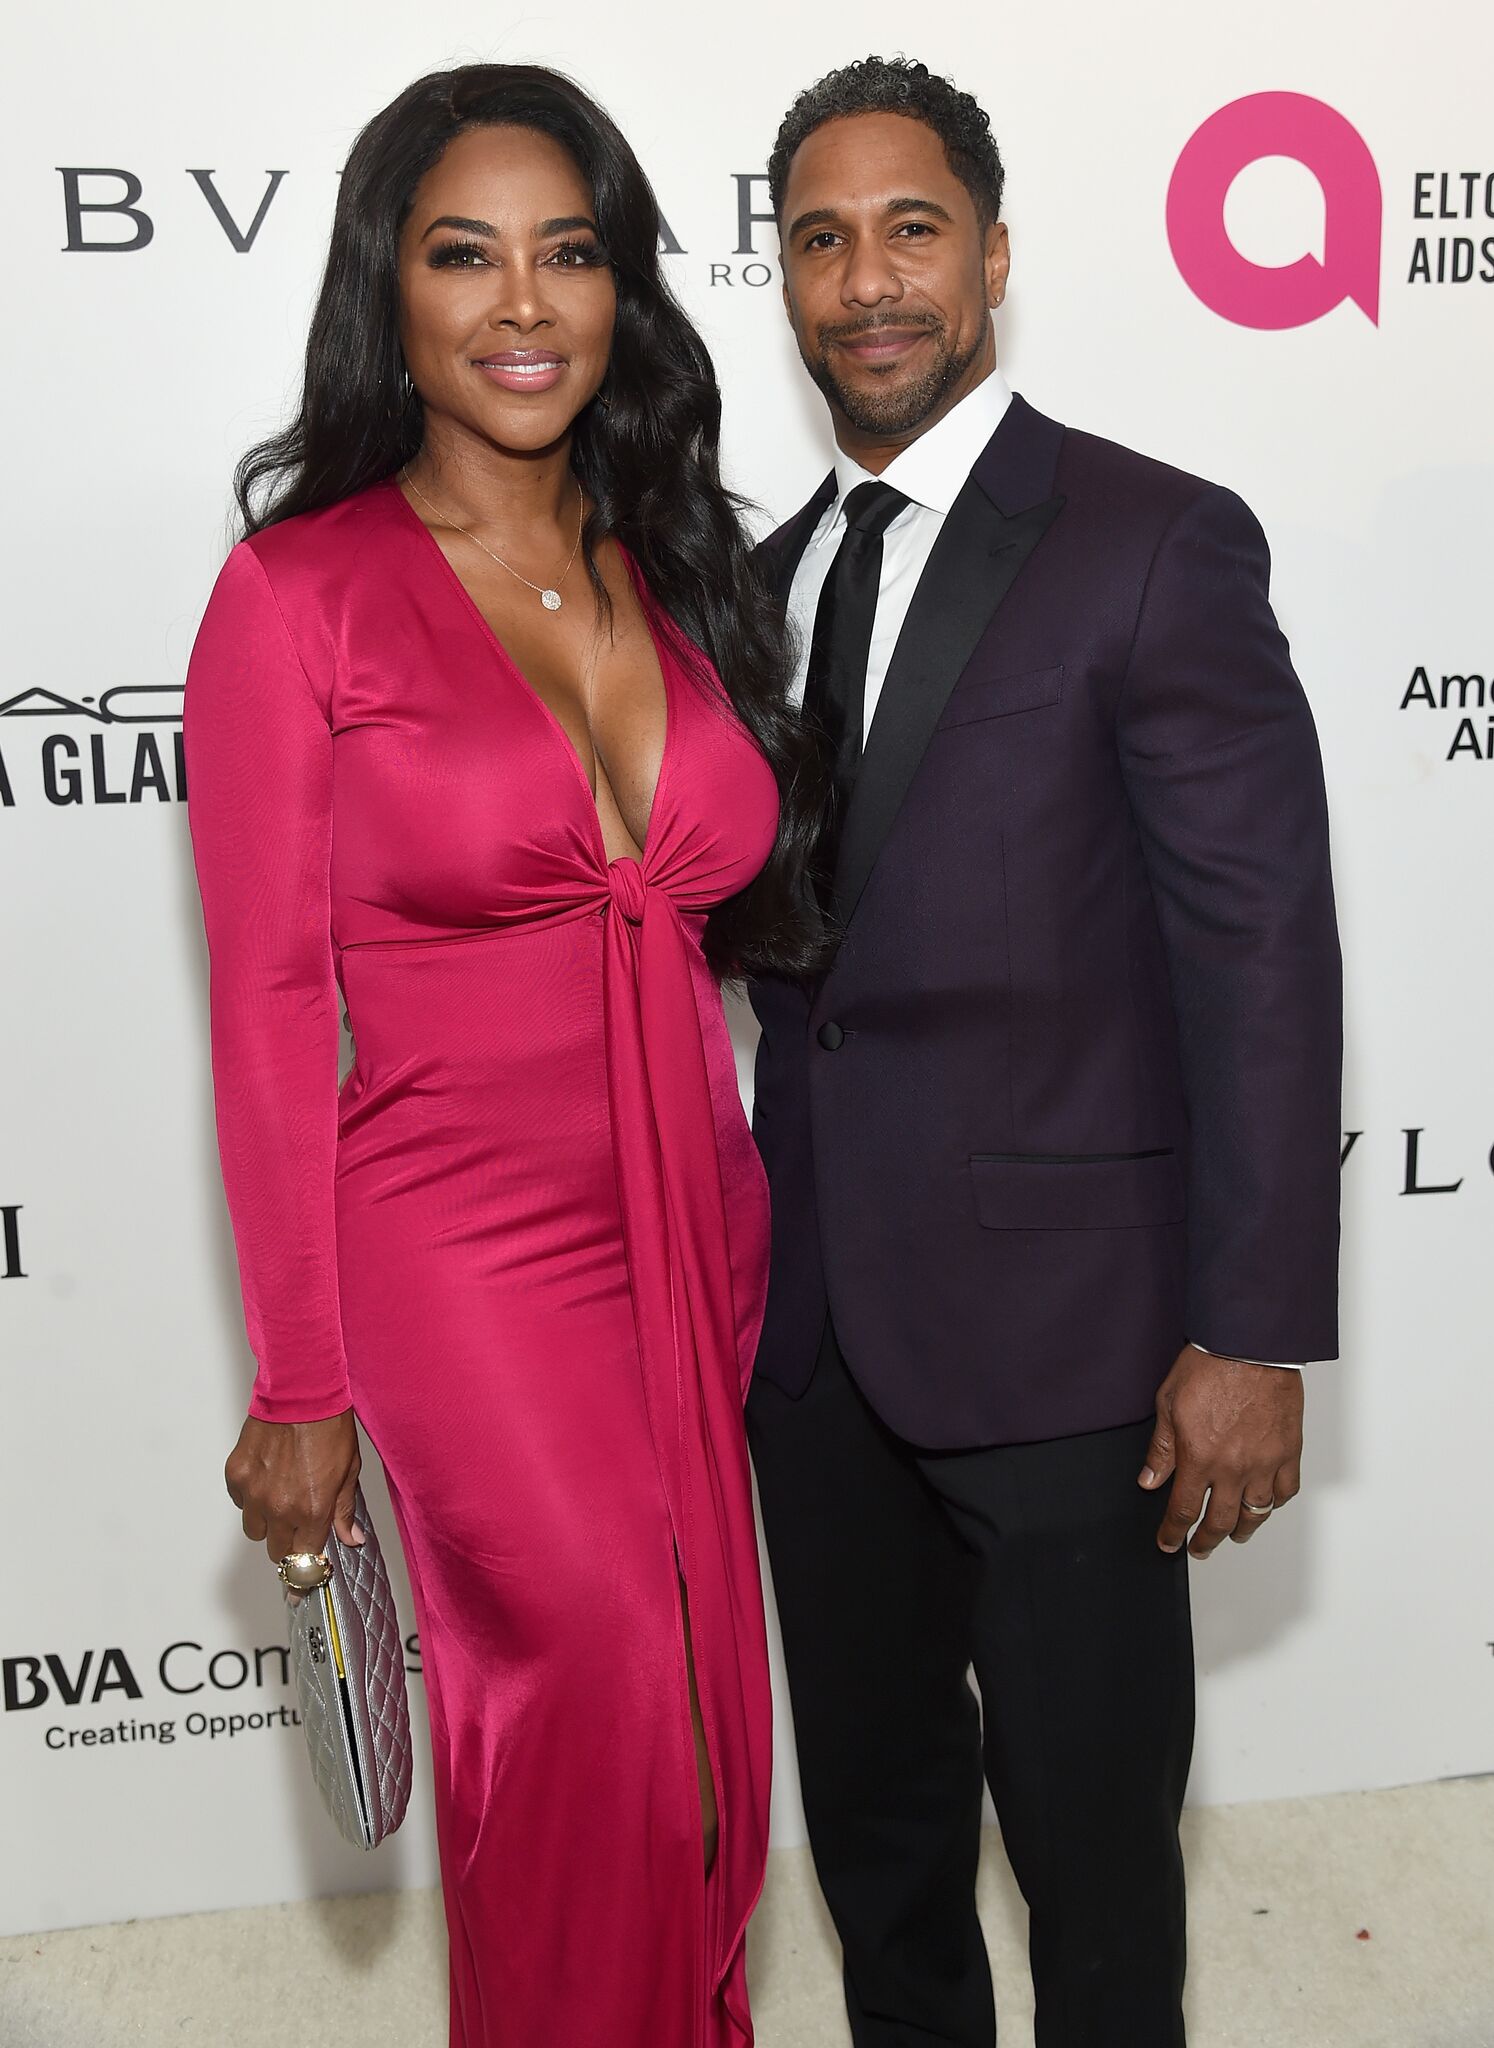 Kenya Moore and Marc Daly attend the 26th annual Elton John AIDS Foundation's Academy Awards Viewing Party in 2018. | Source: Getty Images